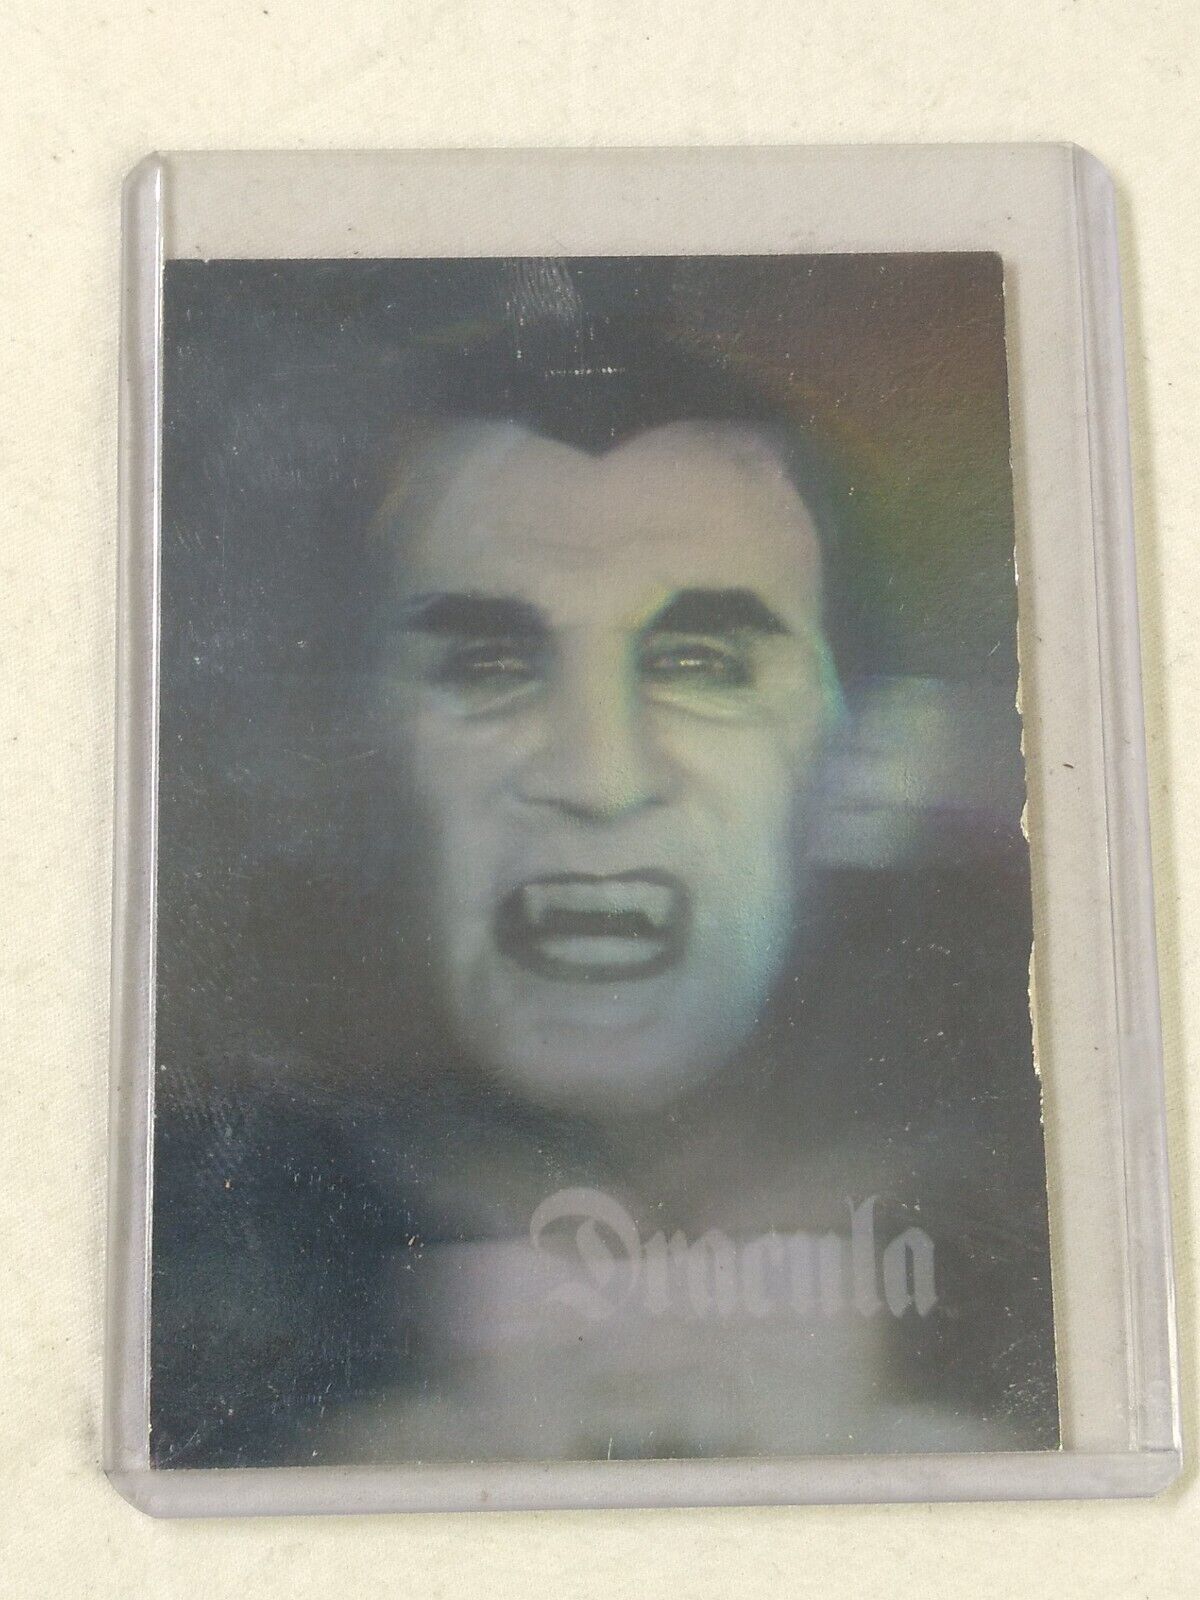 Universal Studios Monsters Pizza Hut  Dracula Holographic Promo Card 1992 